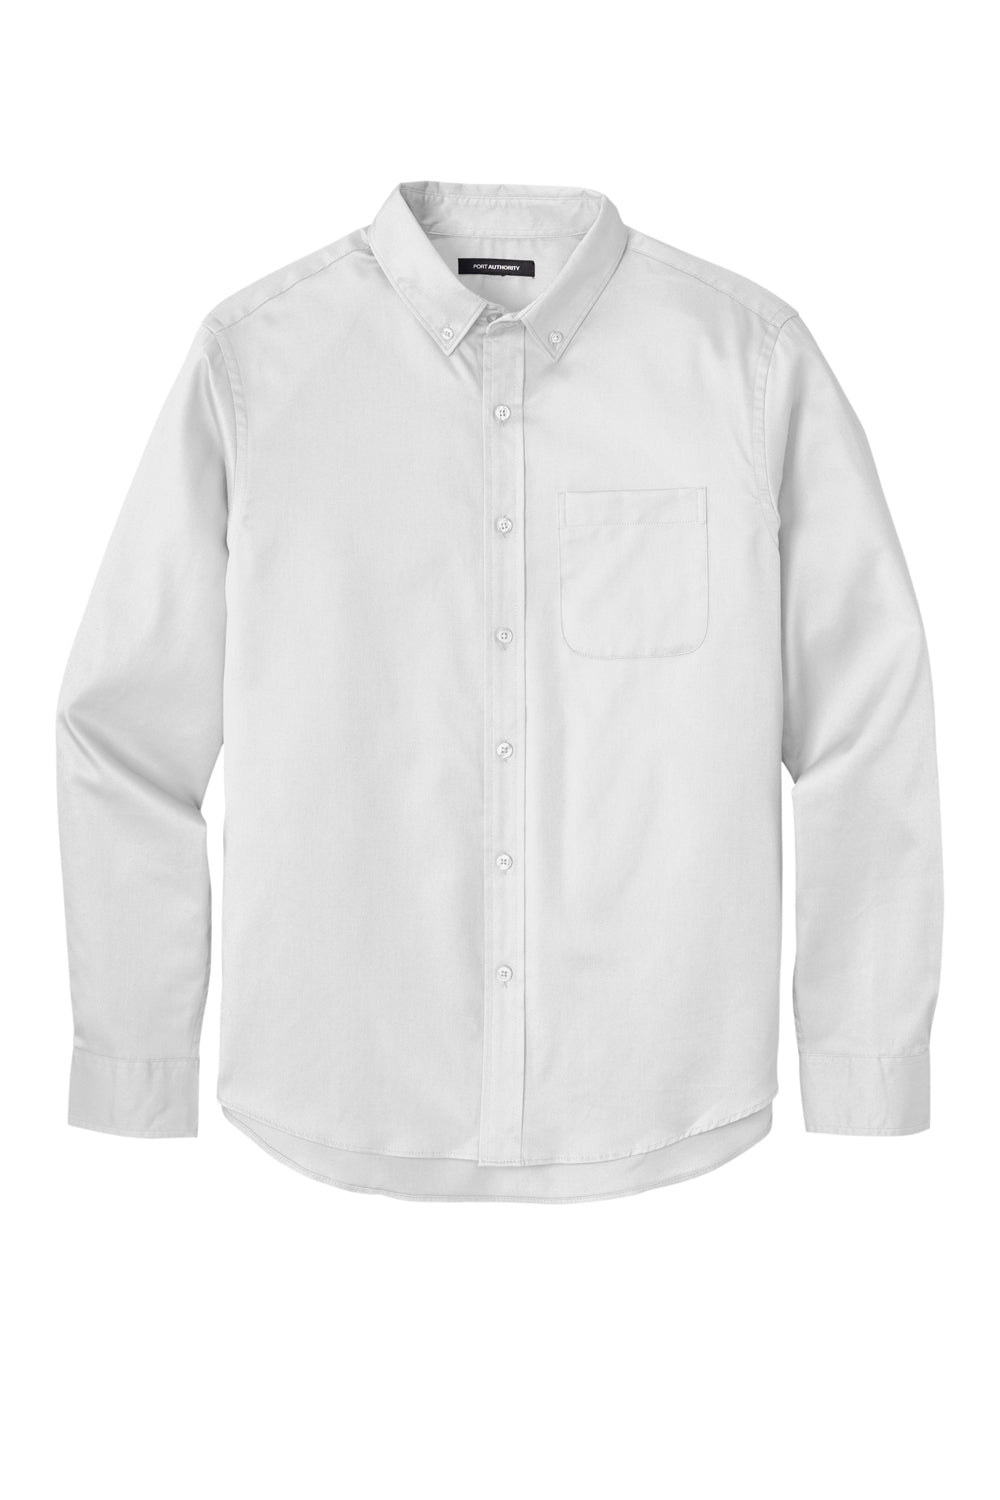 Port Authority W808 SuperPro Wrinkle Resistant React Long Sleeve Button Down Shirt w/ Pocket White Flat Front